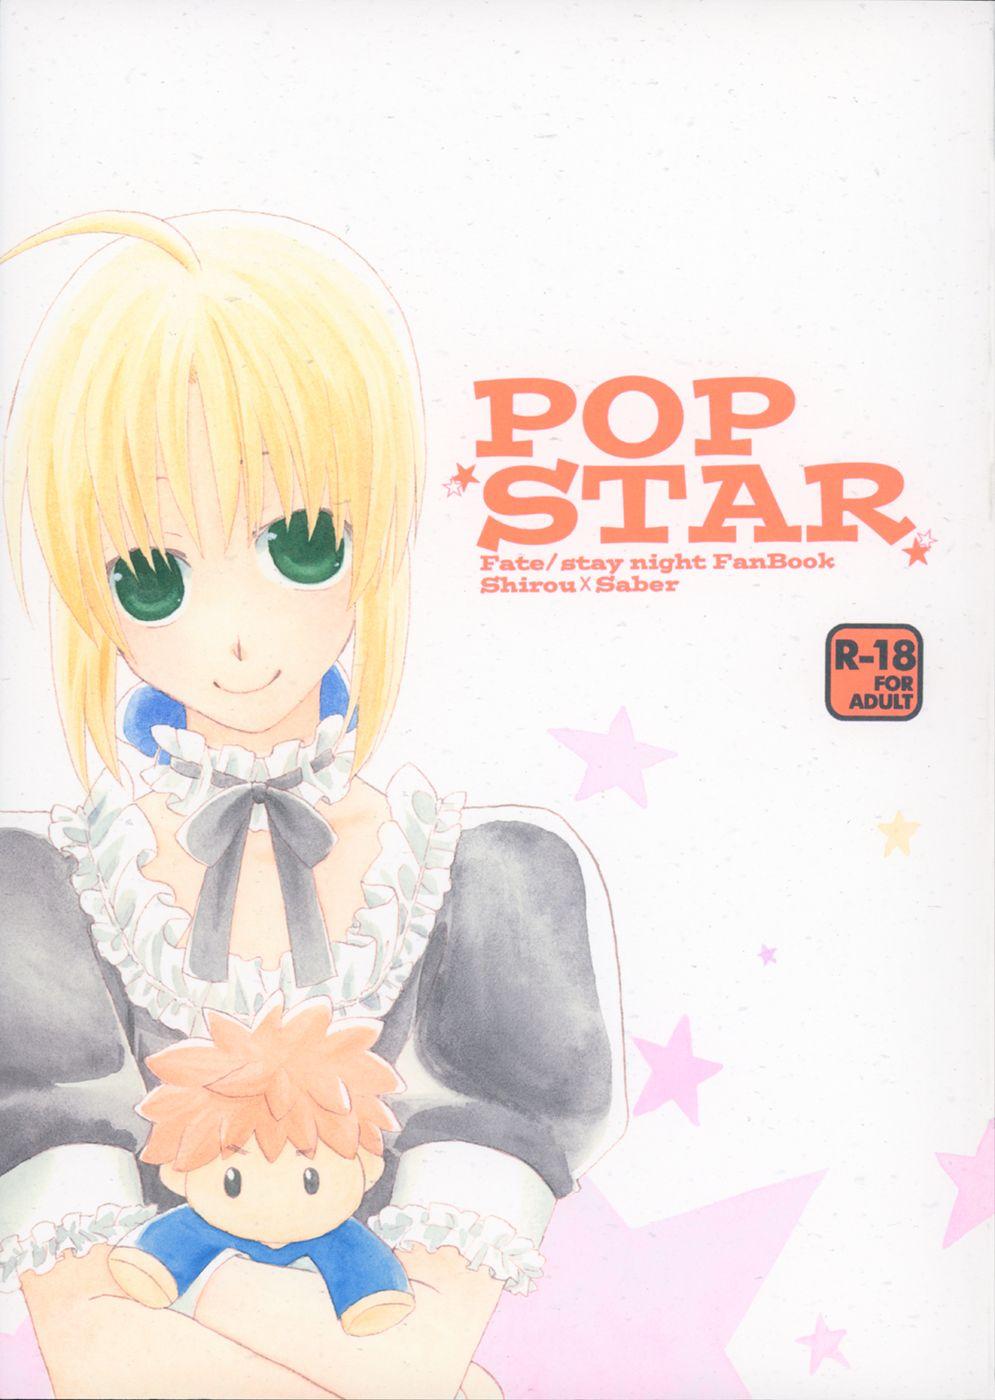 Young POP STAR - Fate stay night Yanks Featured - Page 1